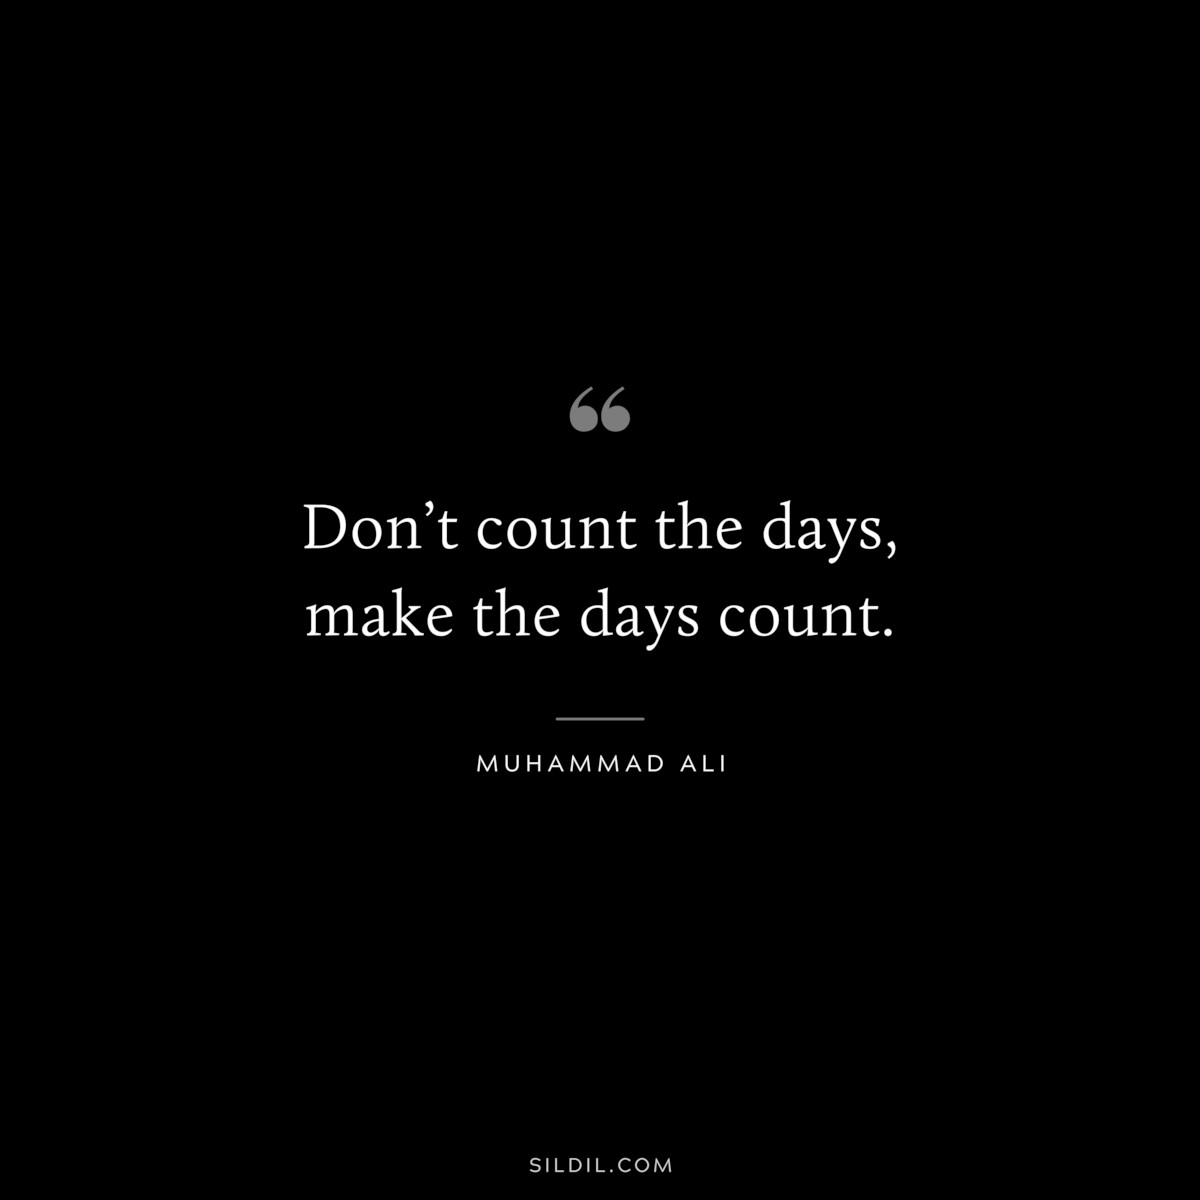 Don’t count the days, make the days count. ― Muhammad Ali